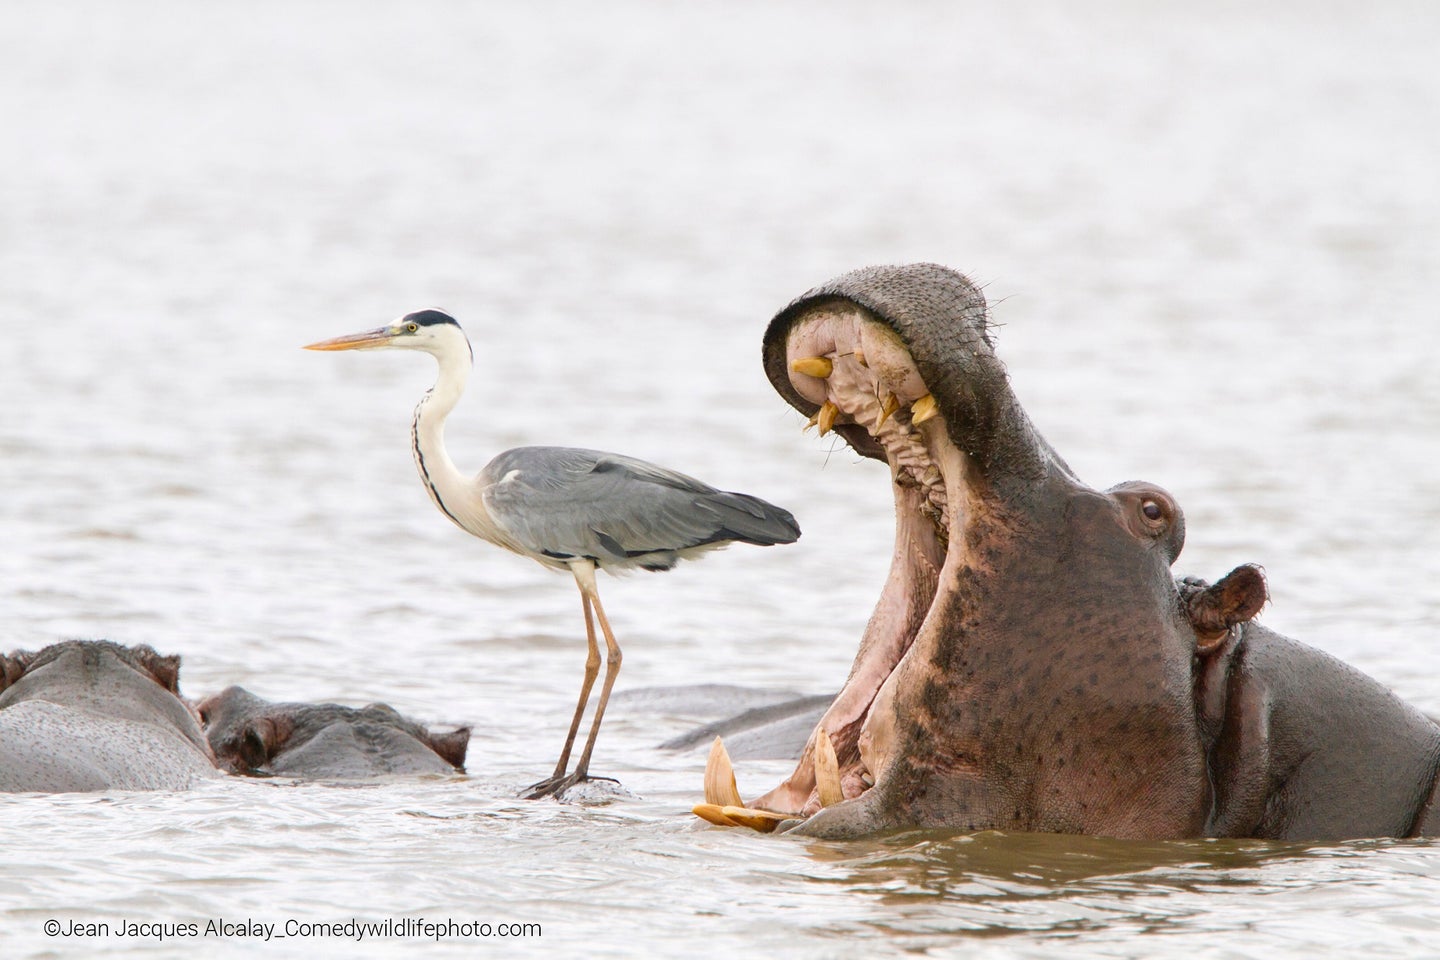 Hippo with its jaws open behind a heron in the water